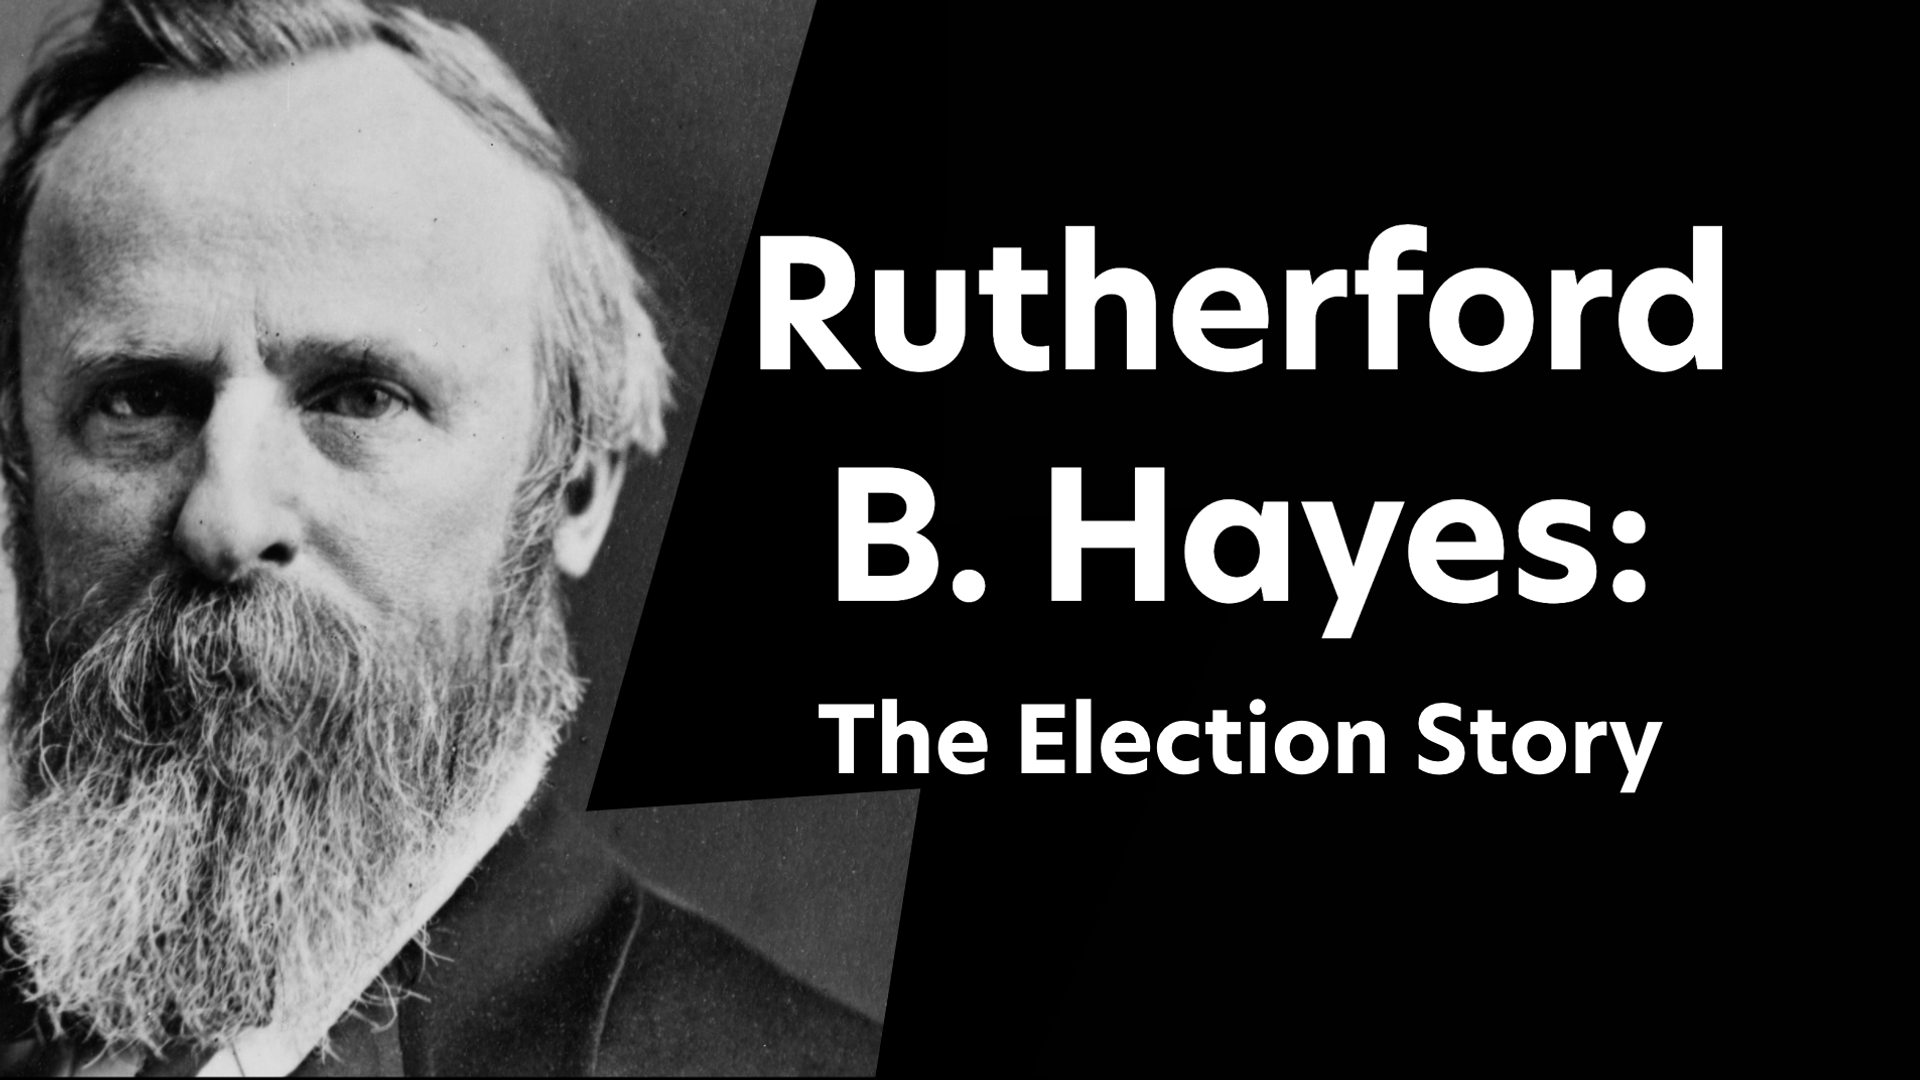 Rutherford B. Hayes: The Election Story